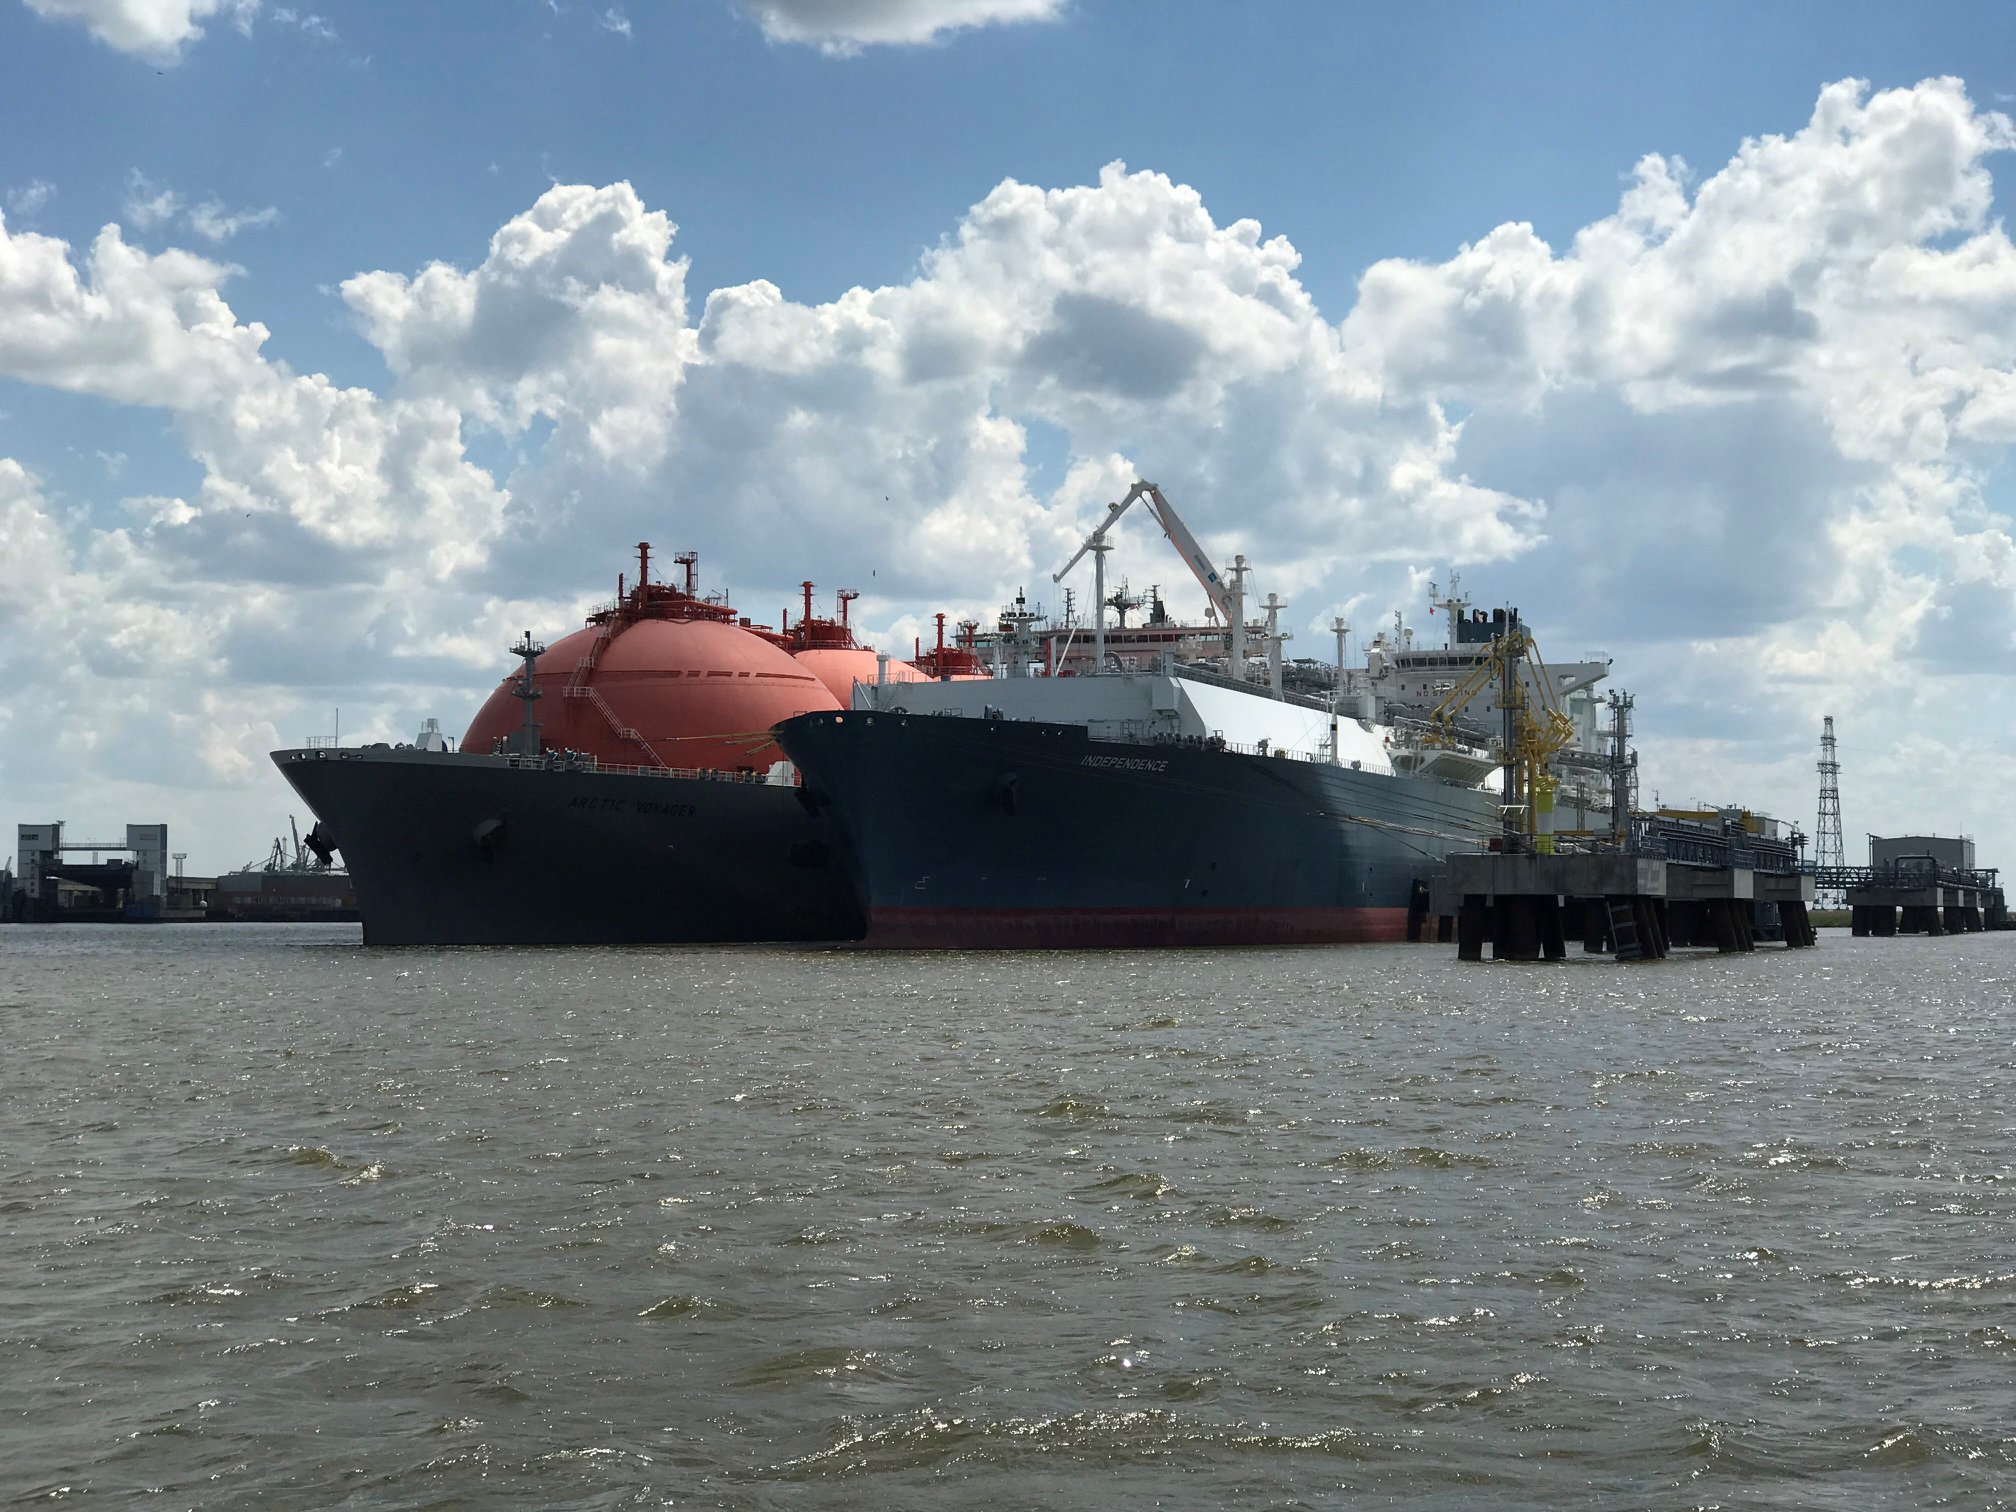 Lithuanian terminal receives 50th LNG cargo - Offshore Energy